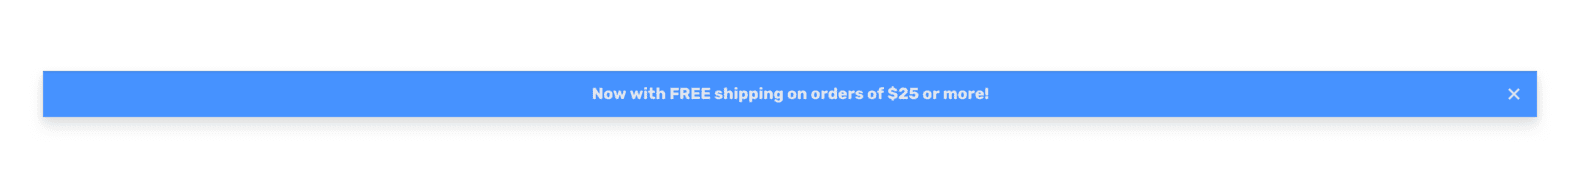 Alert bar: Now with FREE shipping on orders of $25 or more!